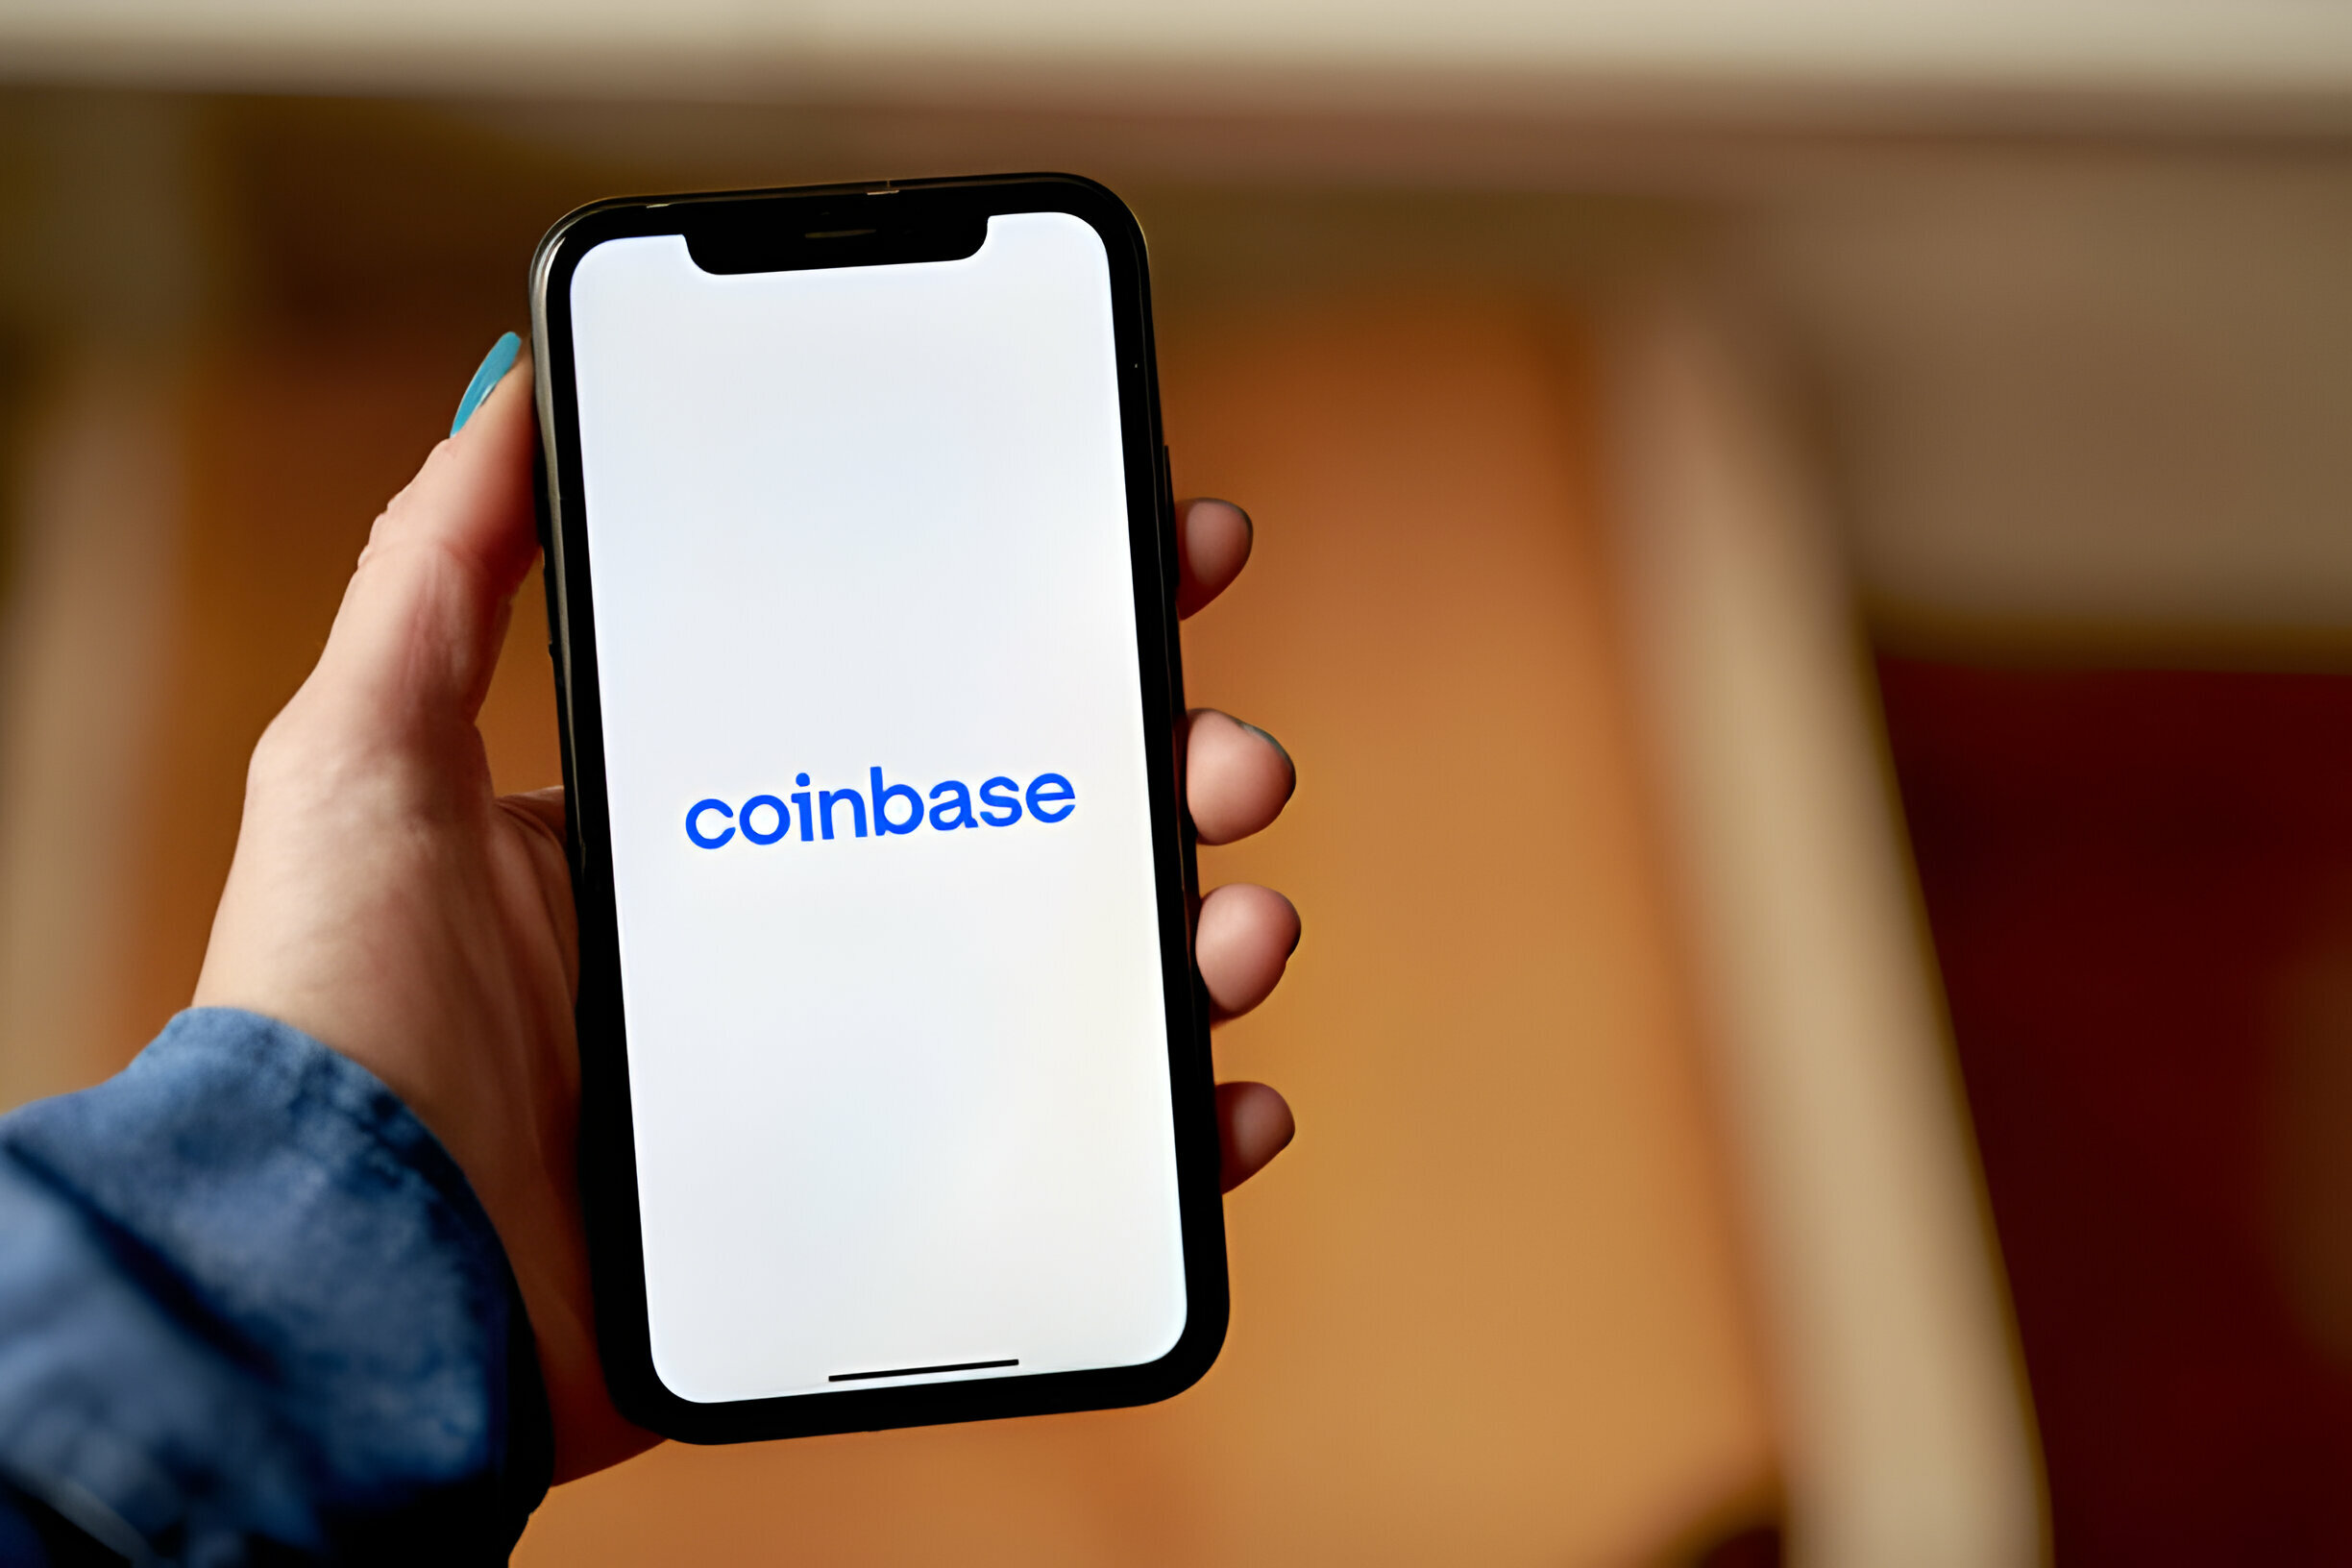 How To Transfer Money From Coinbase Wallet To Bank Account